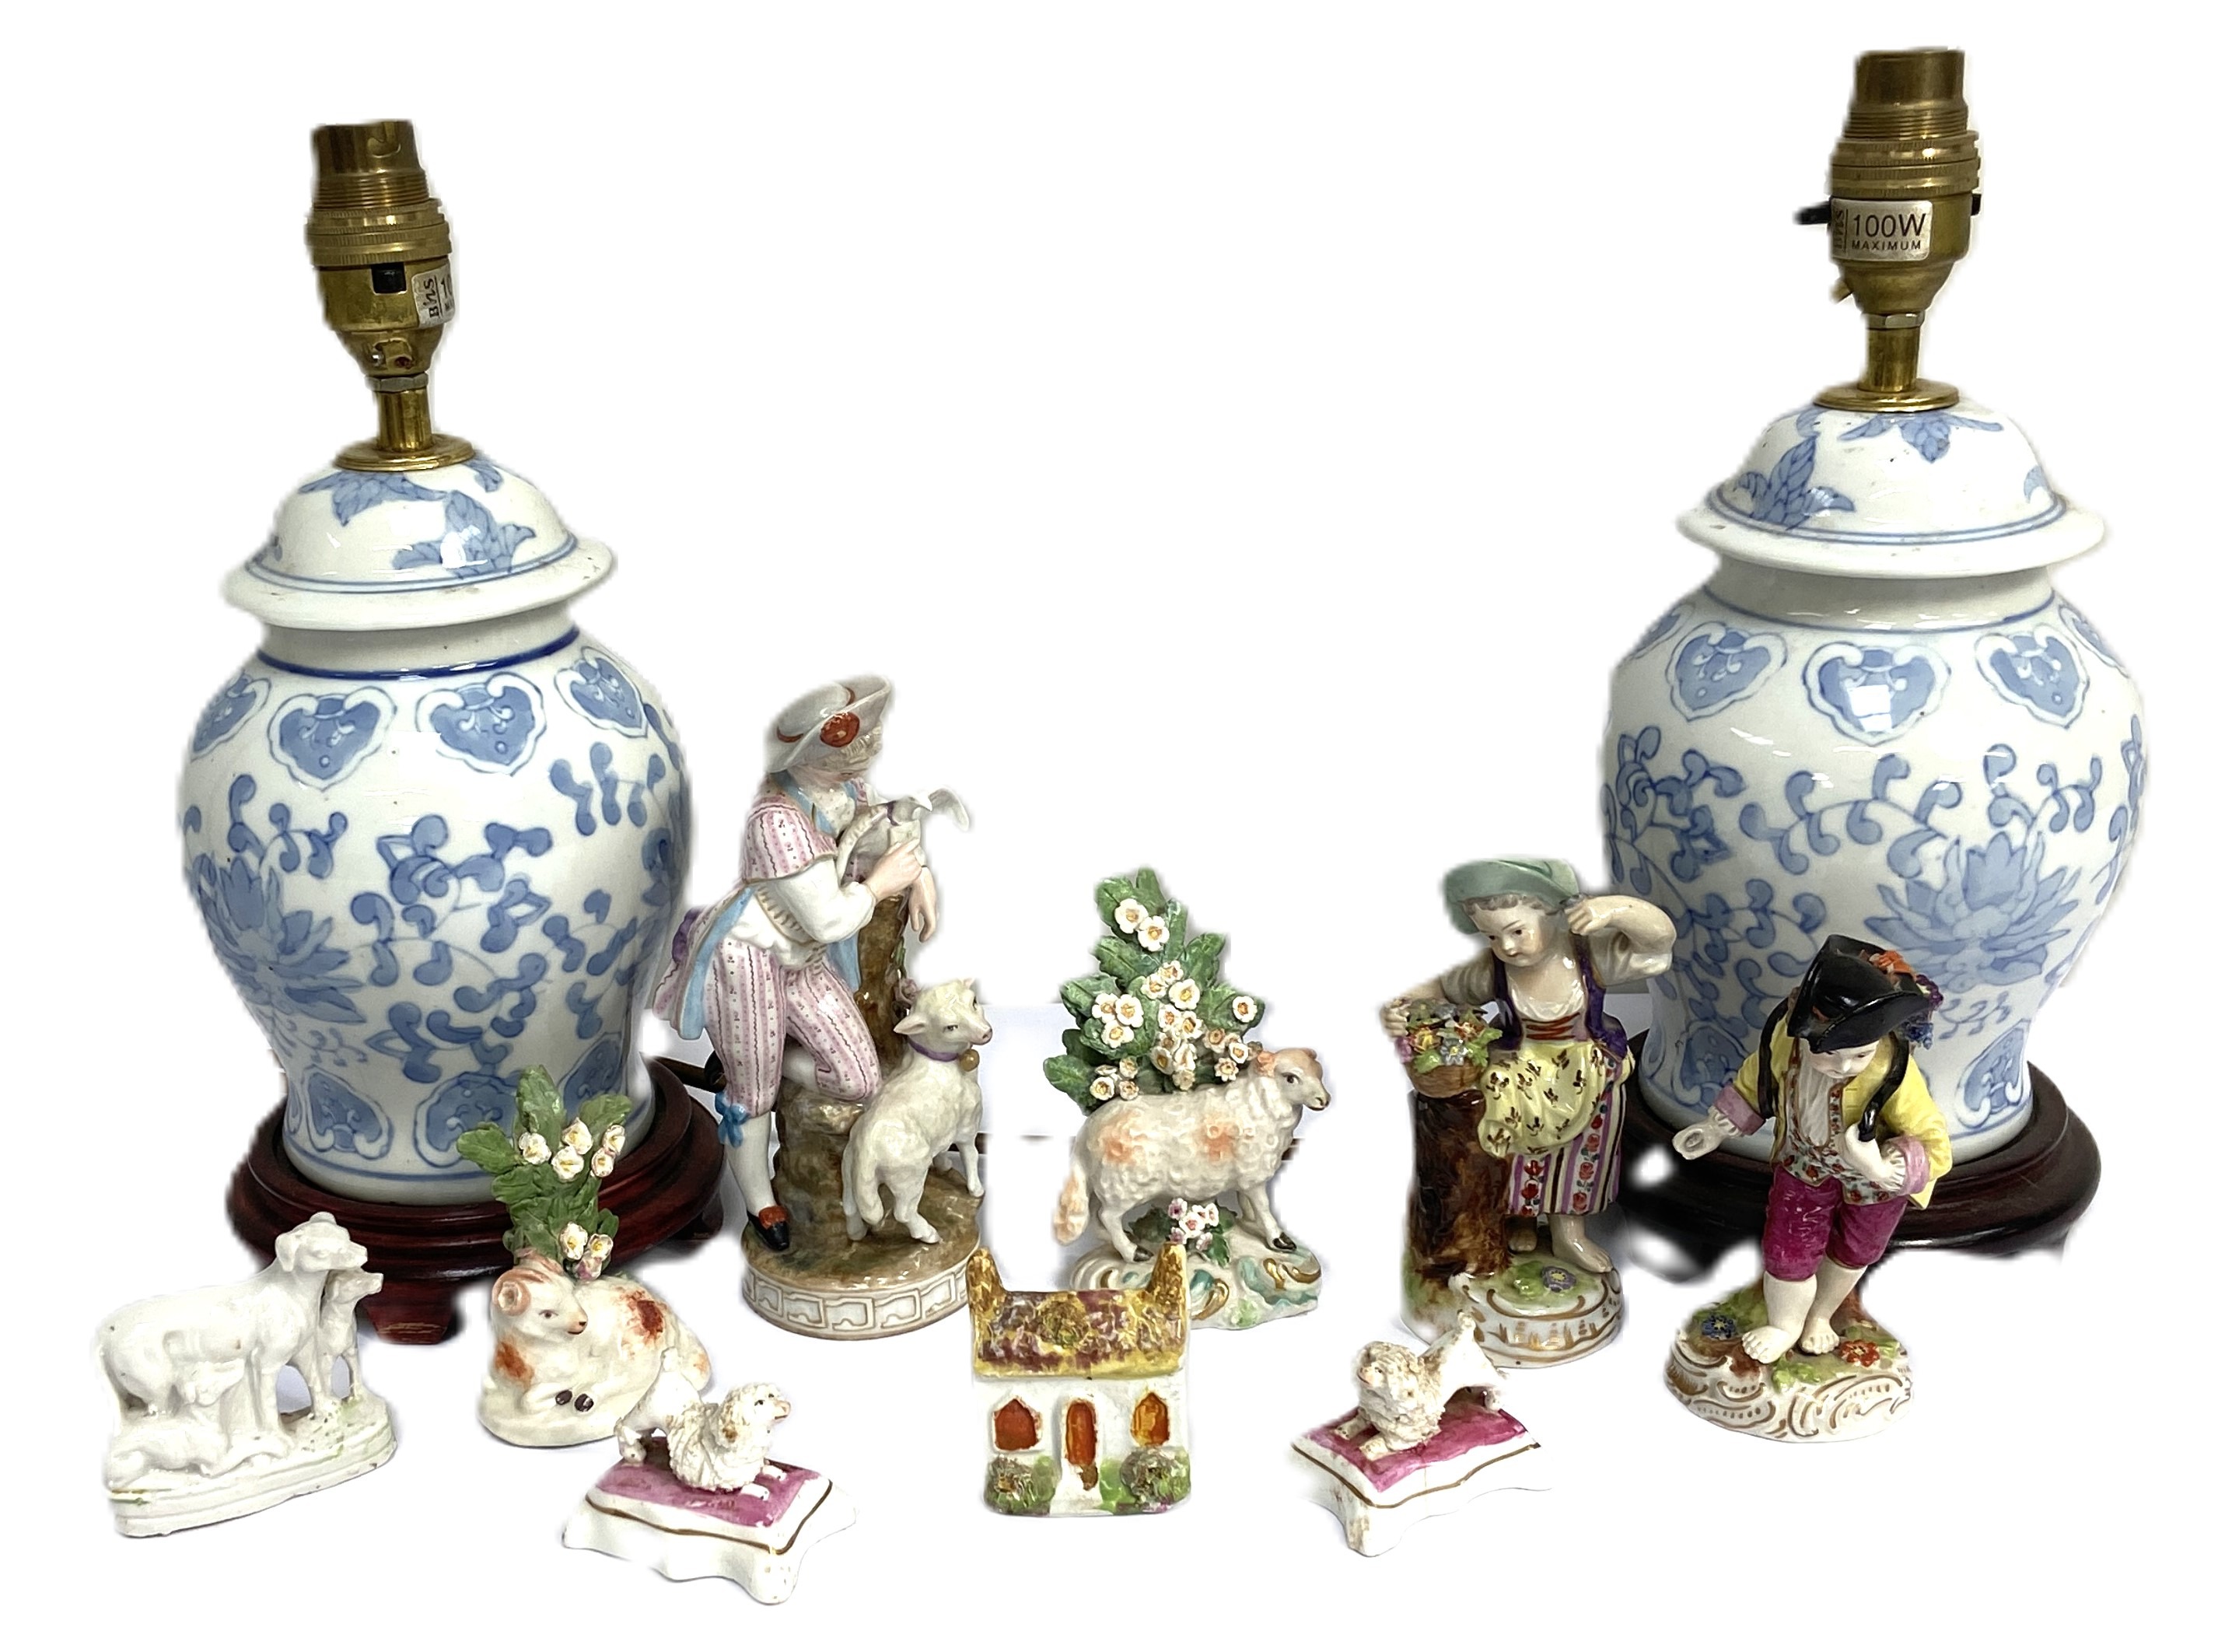 A small group of china figure groups, including two small figures of poodles on cushions; two